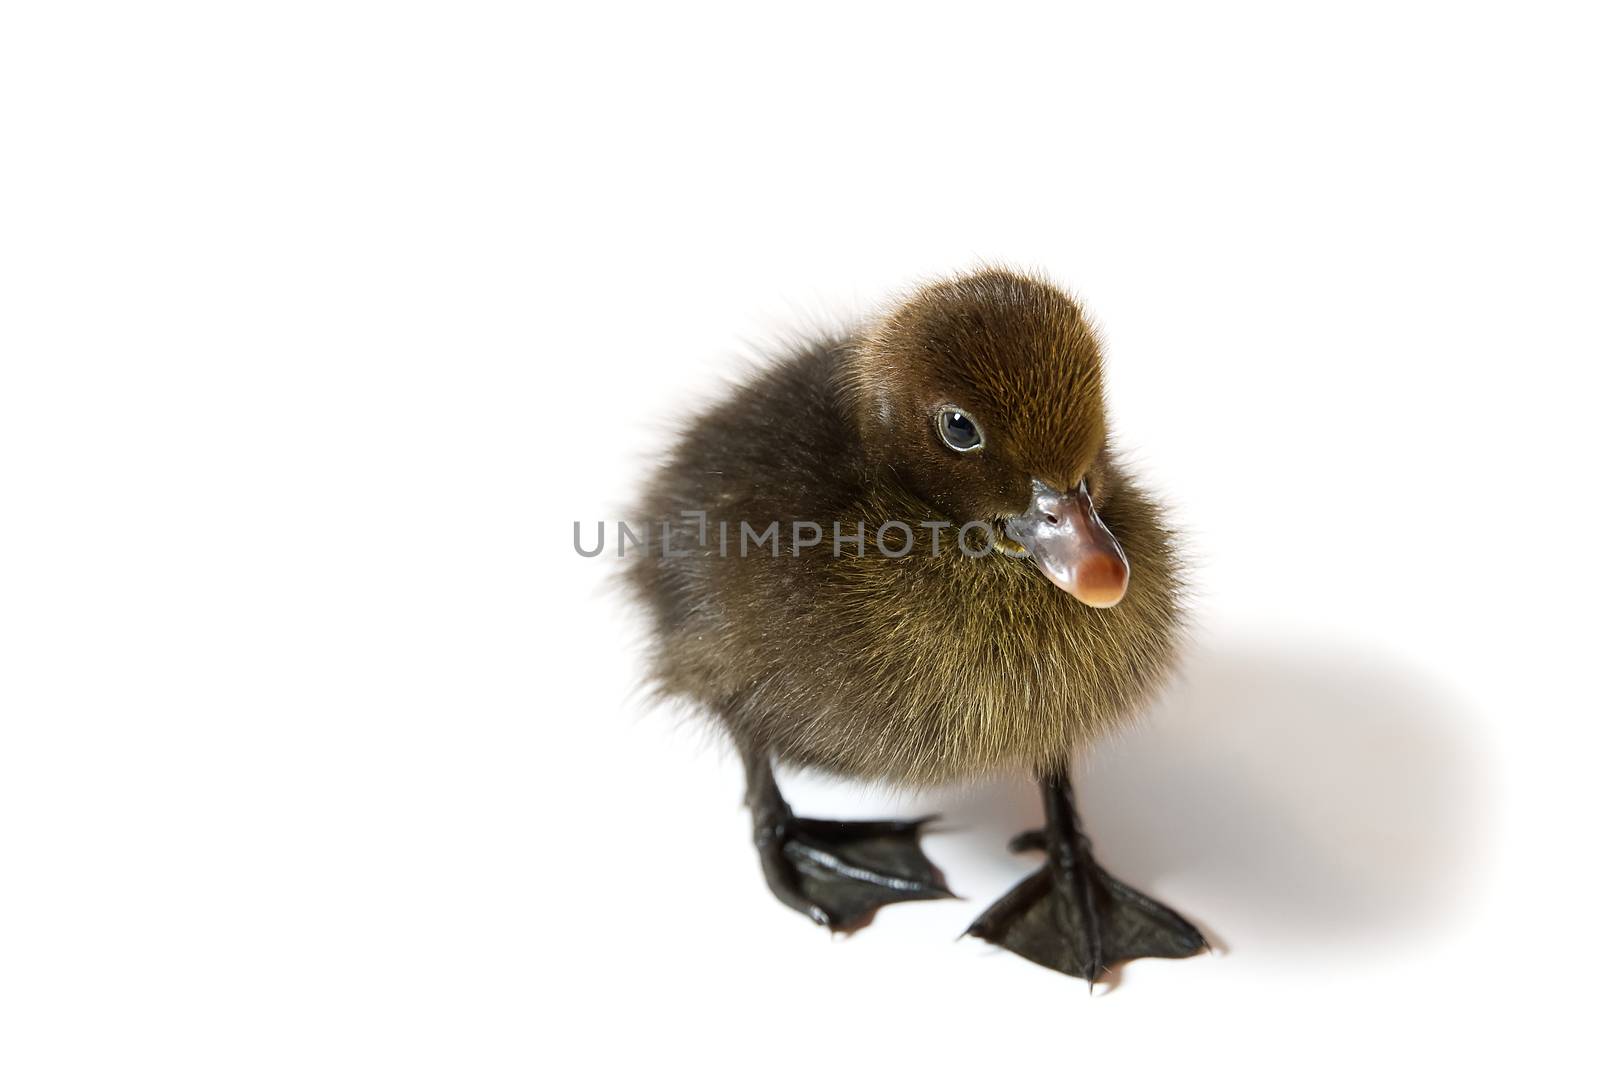 Brown newborn duckling closeup on white background. by PhotoTime